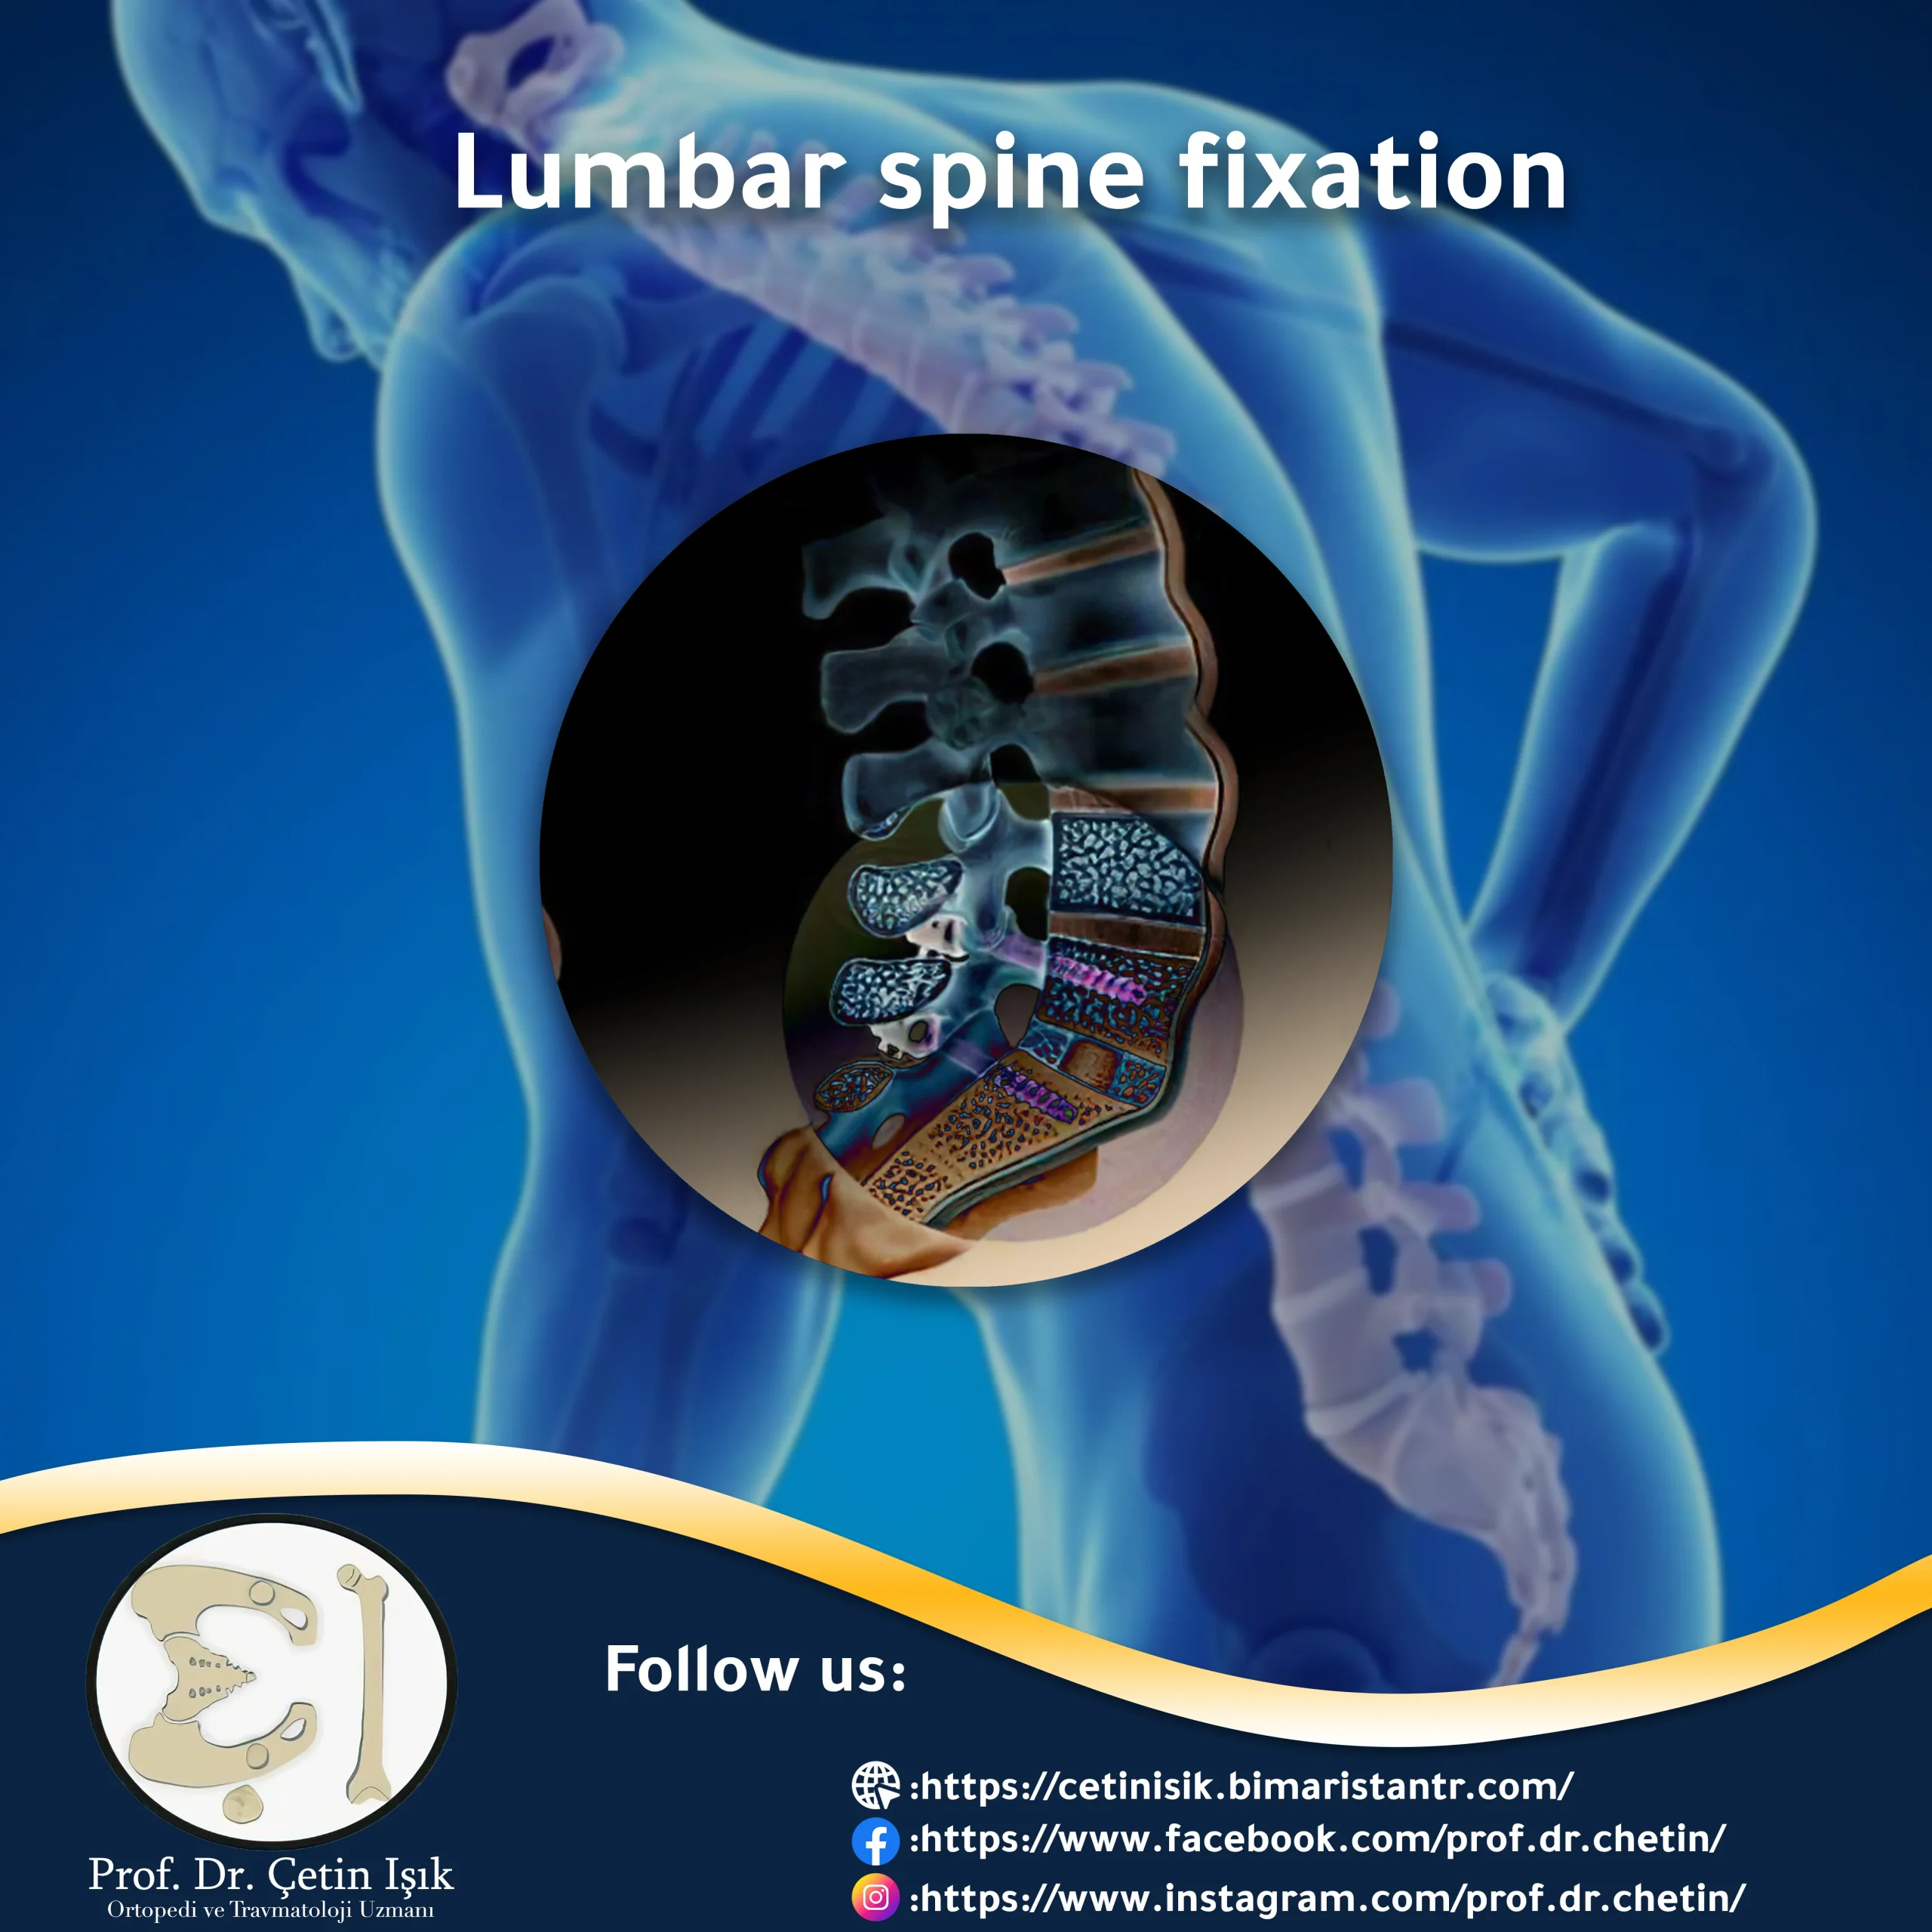 Lumbar spine fixation surgery to straighten the back